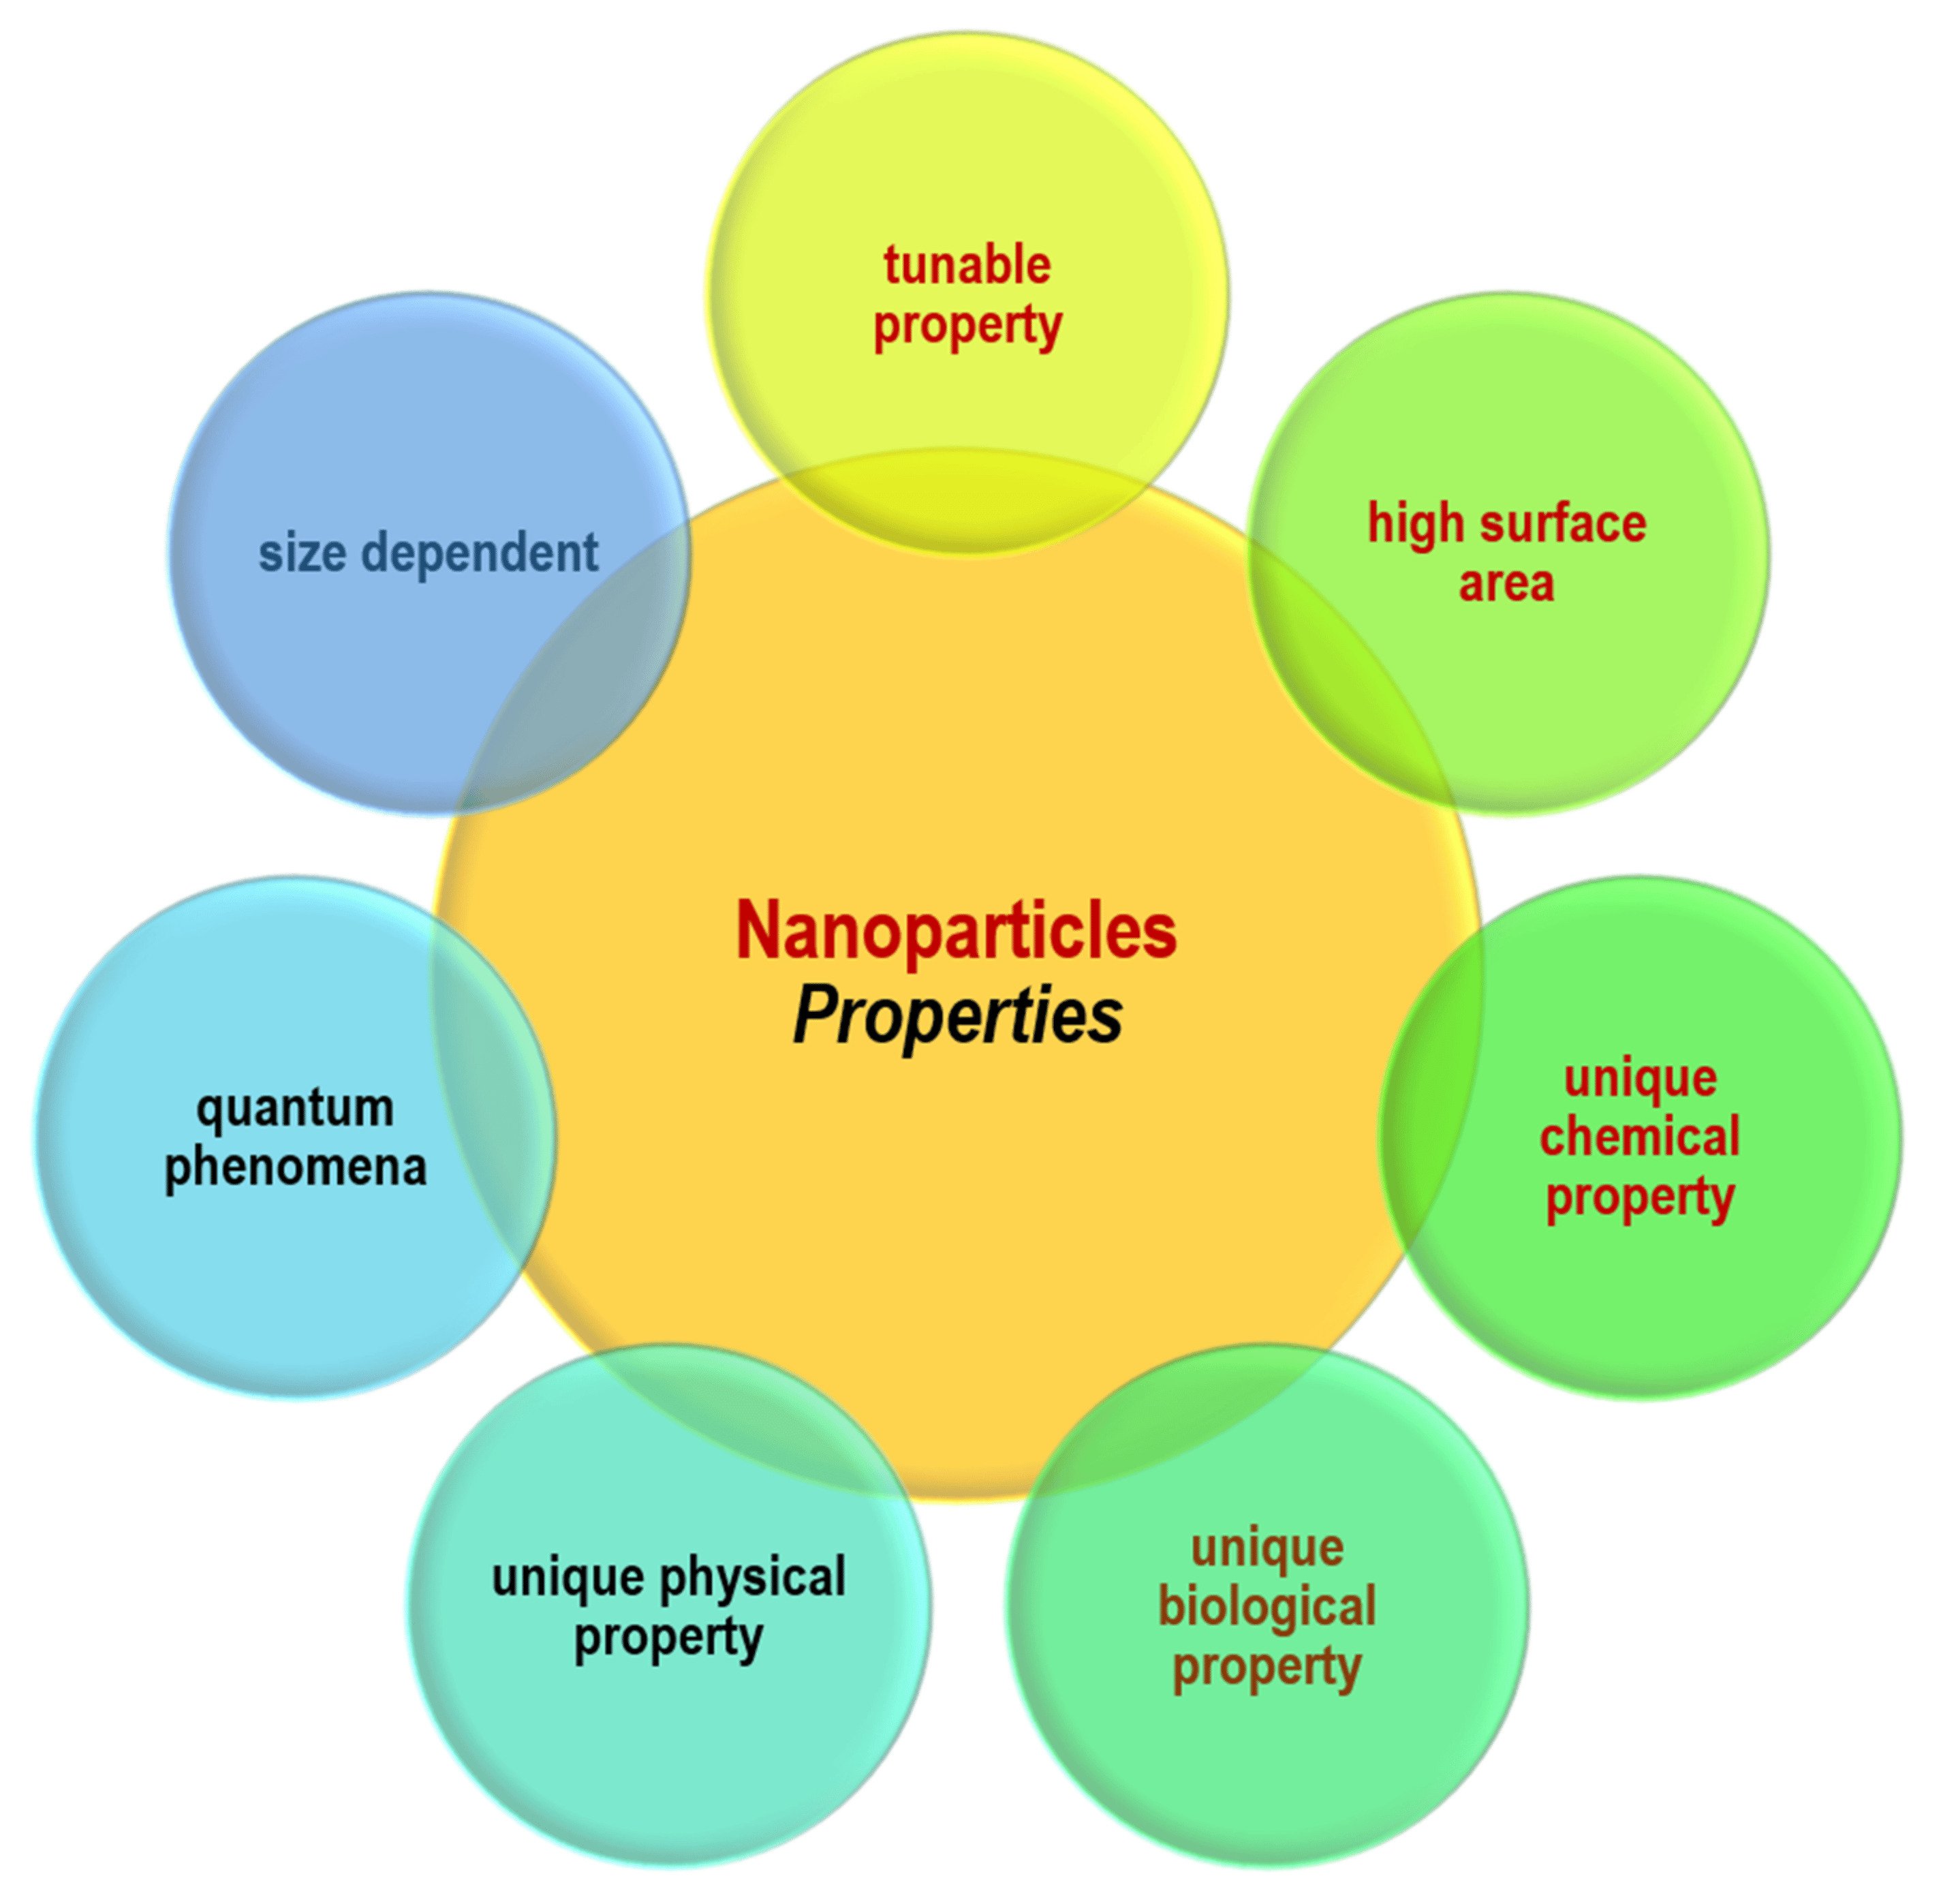 Investigation of the Physical and Chemical Properties of Nanoparticles